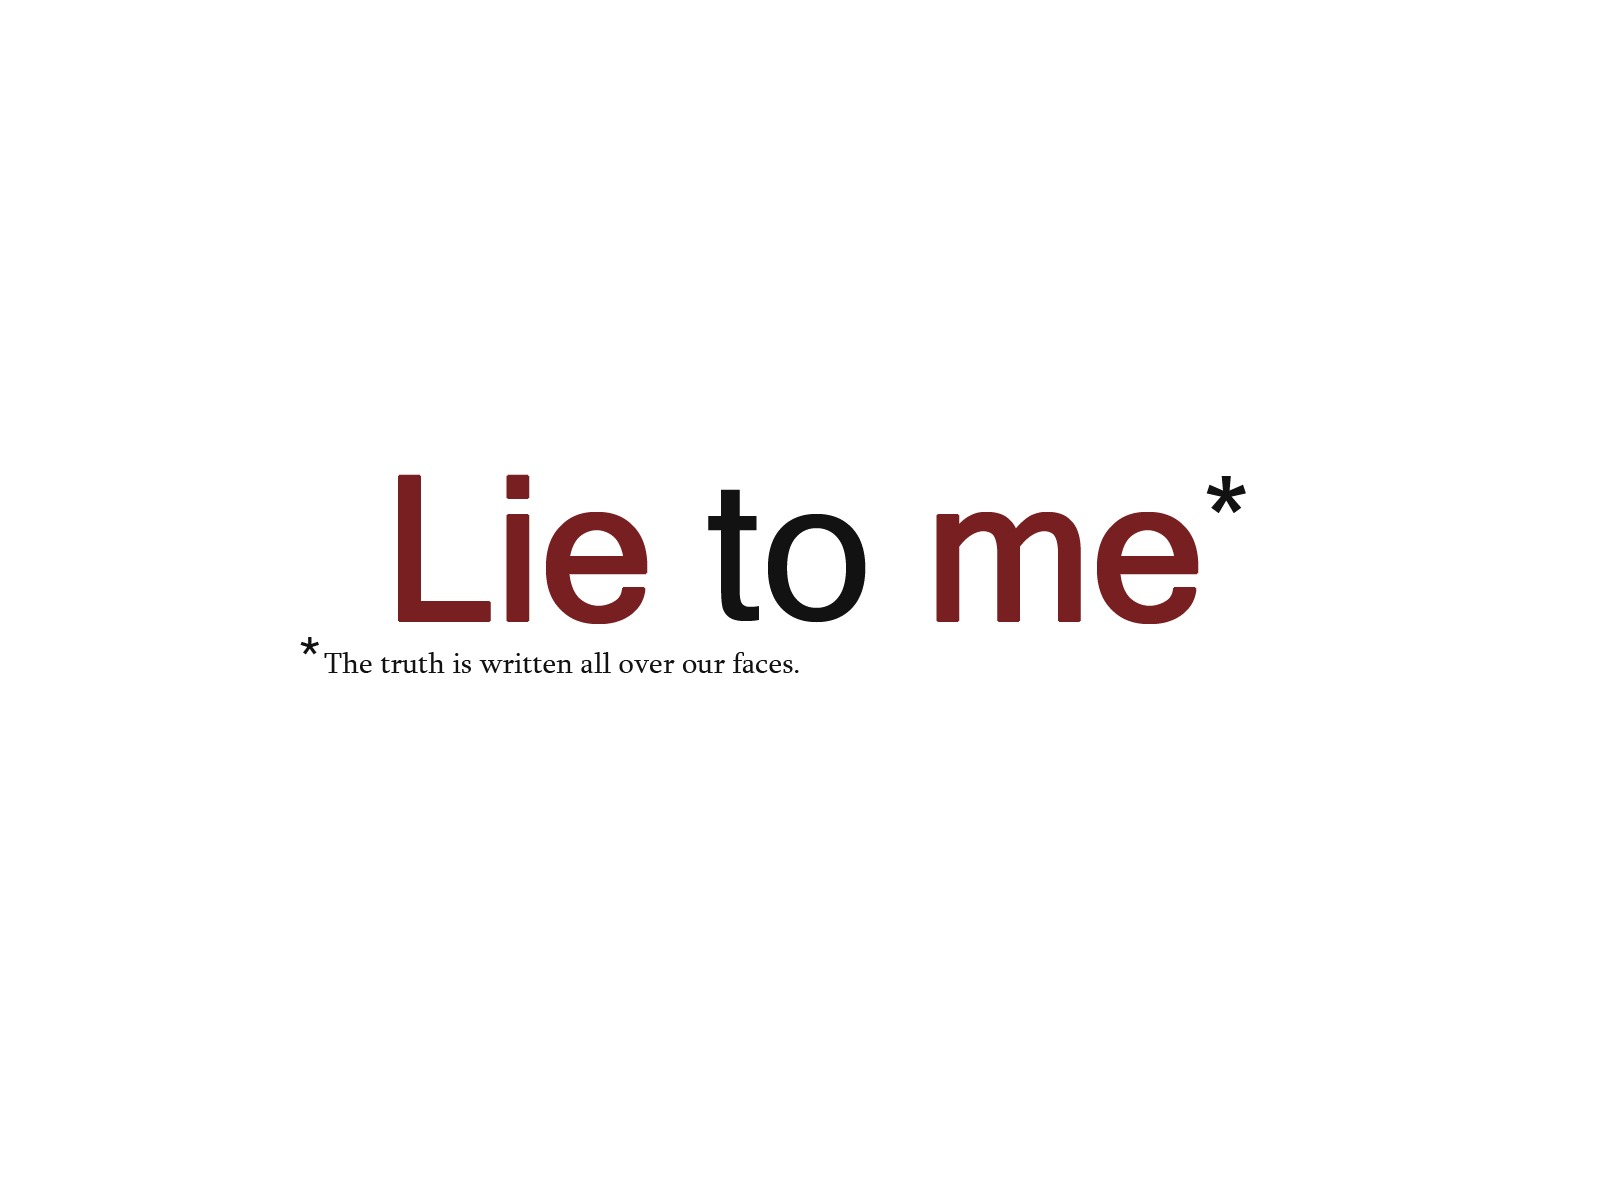 Lie to me movie wallpapers #6 - 1600x1200